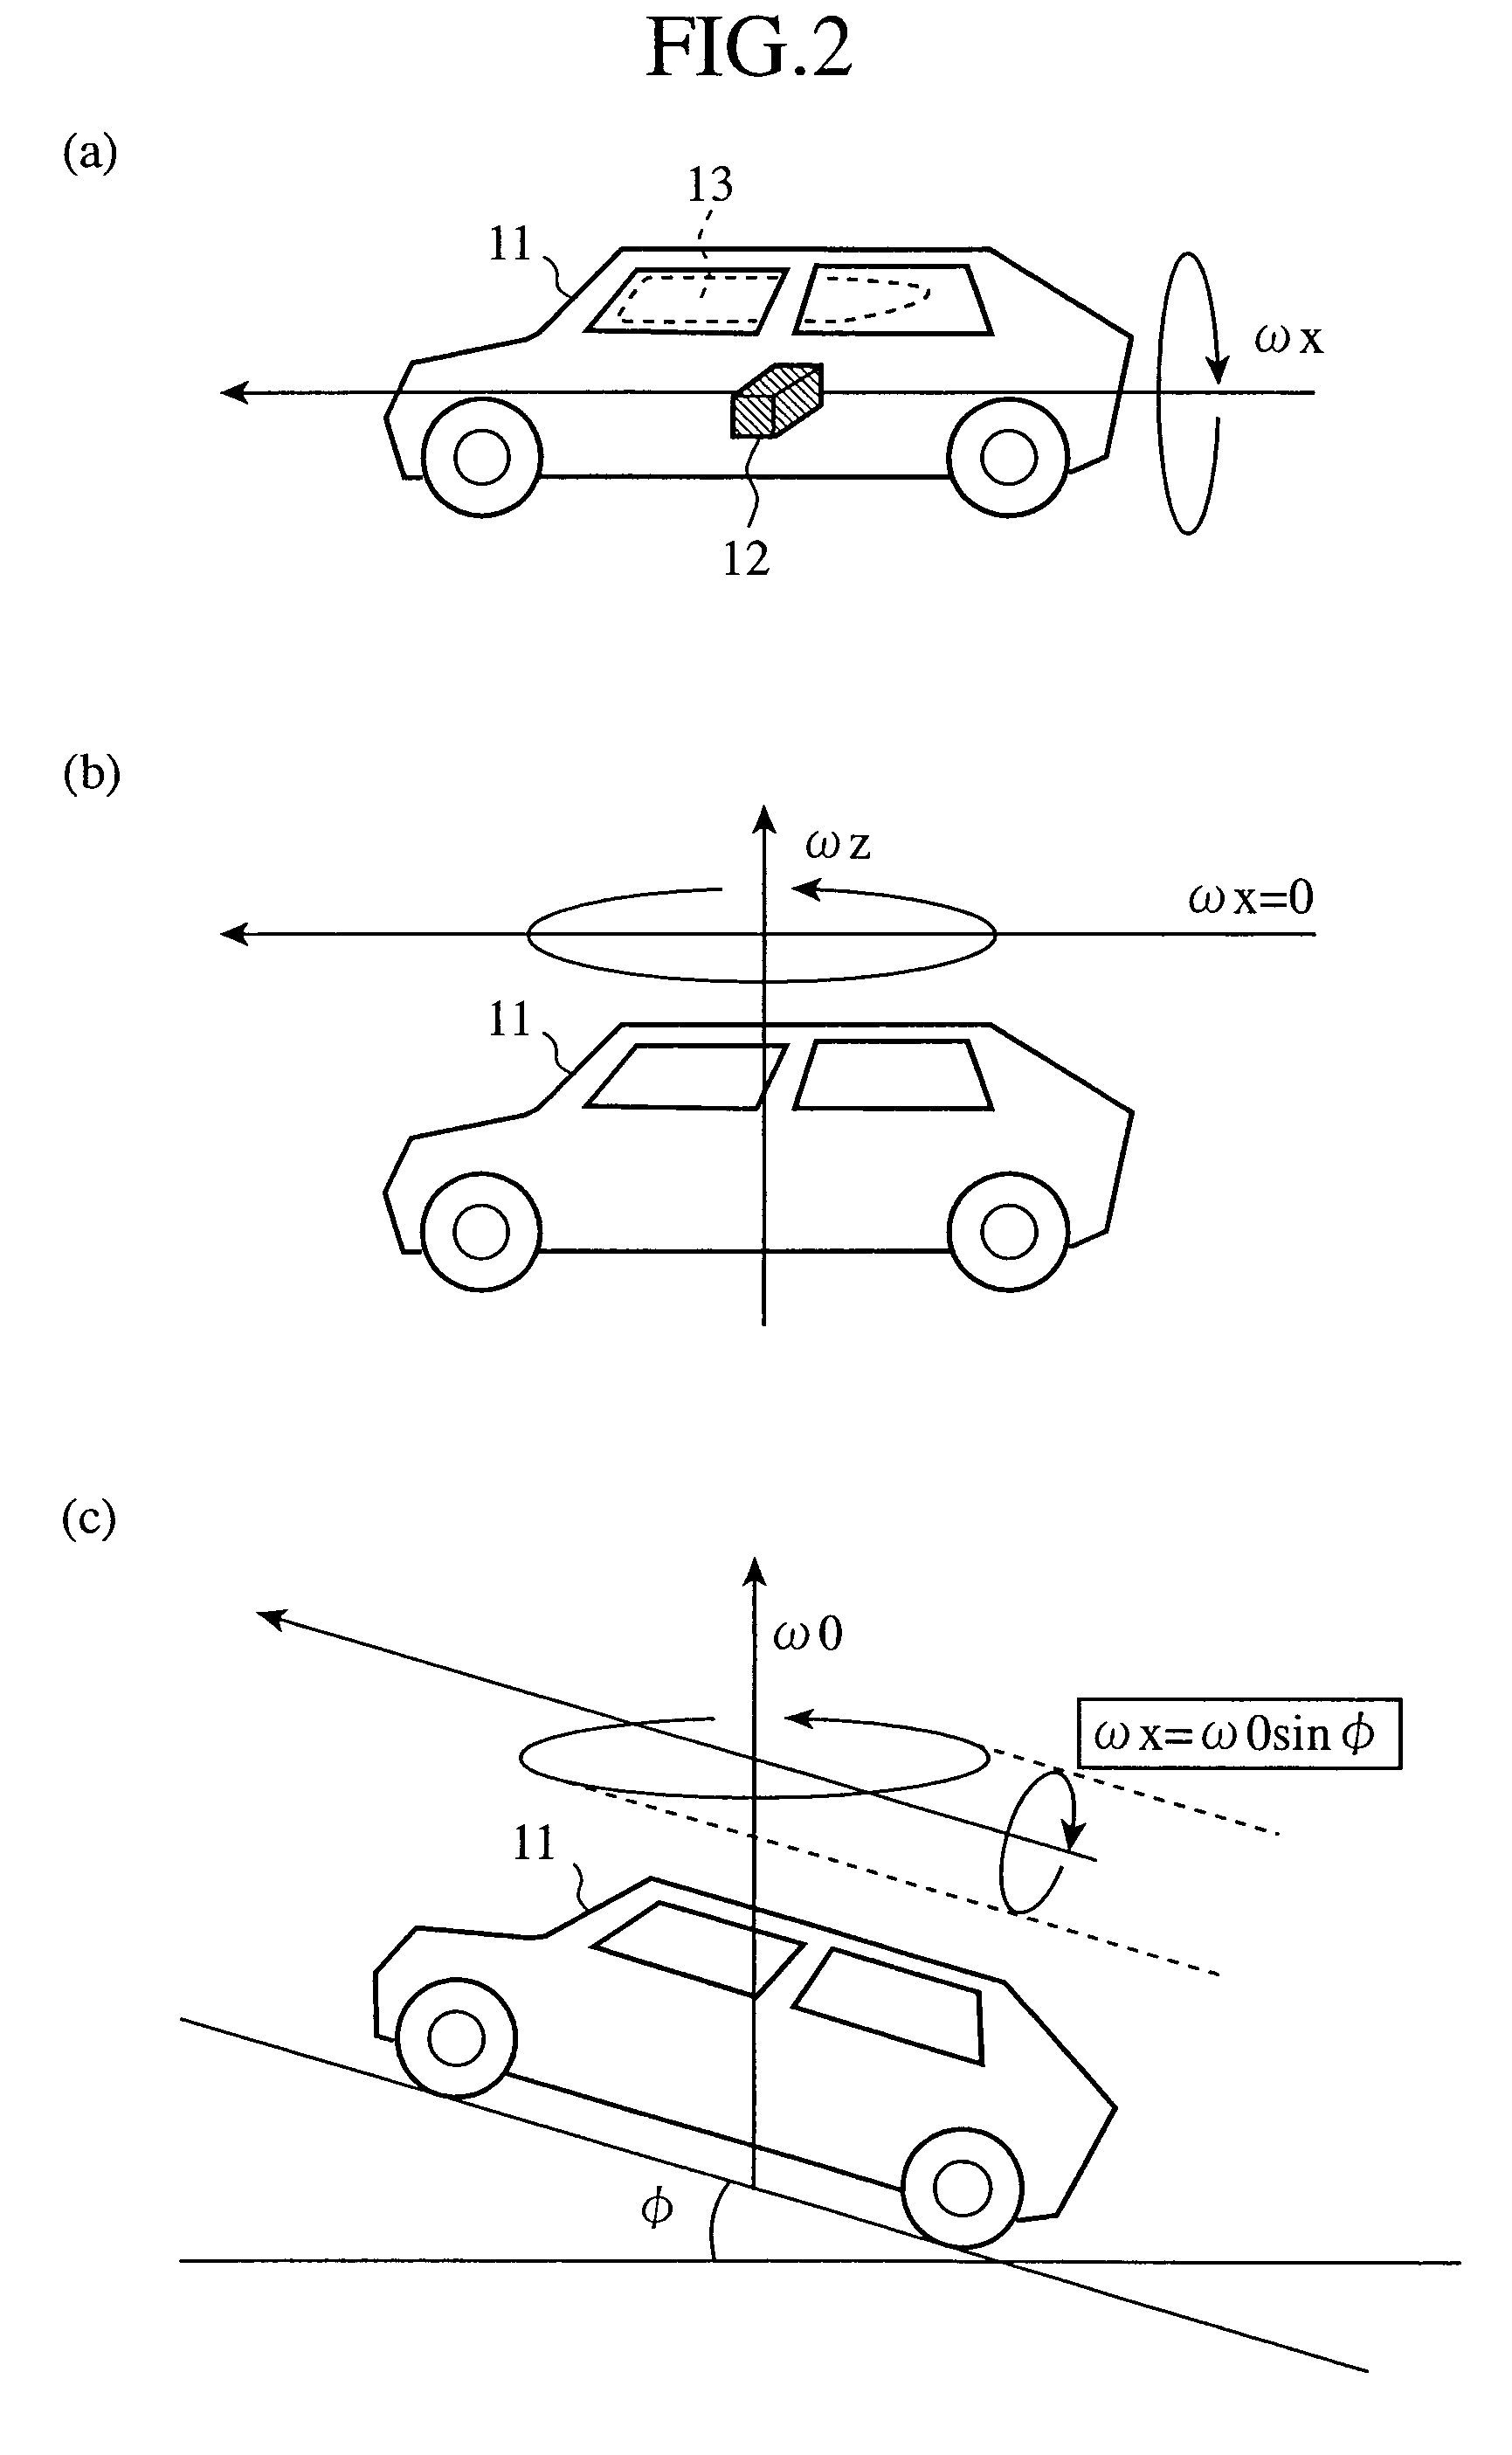 Rollover judging device